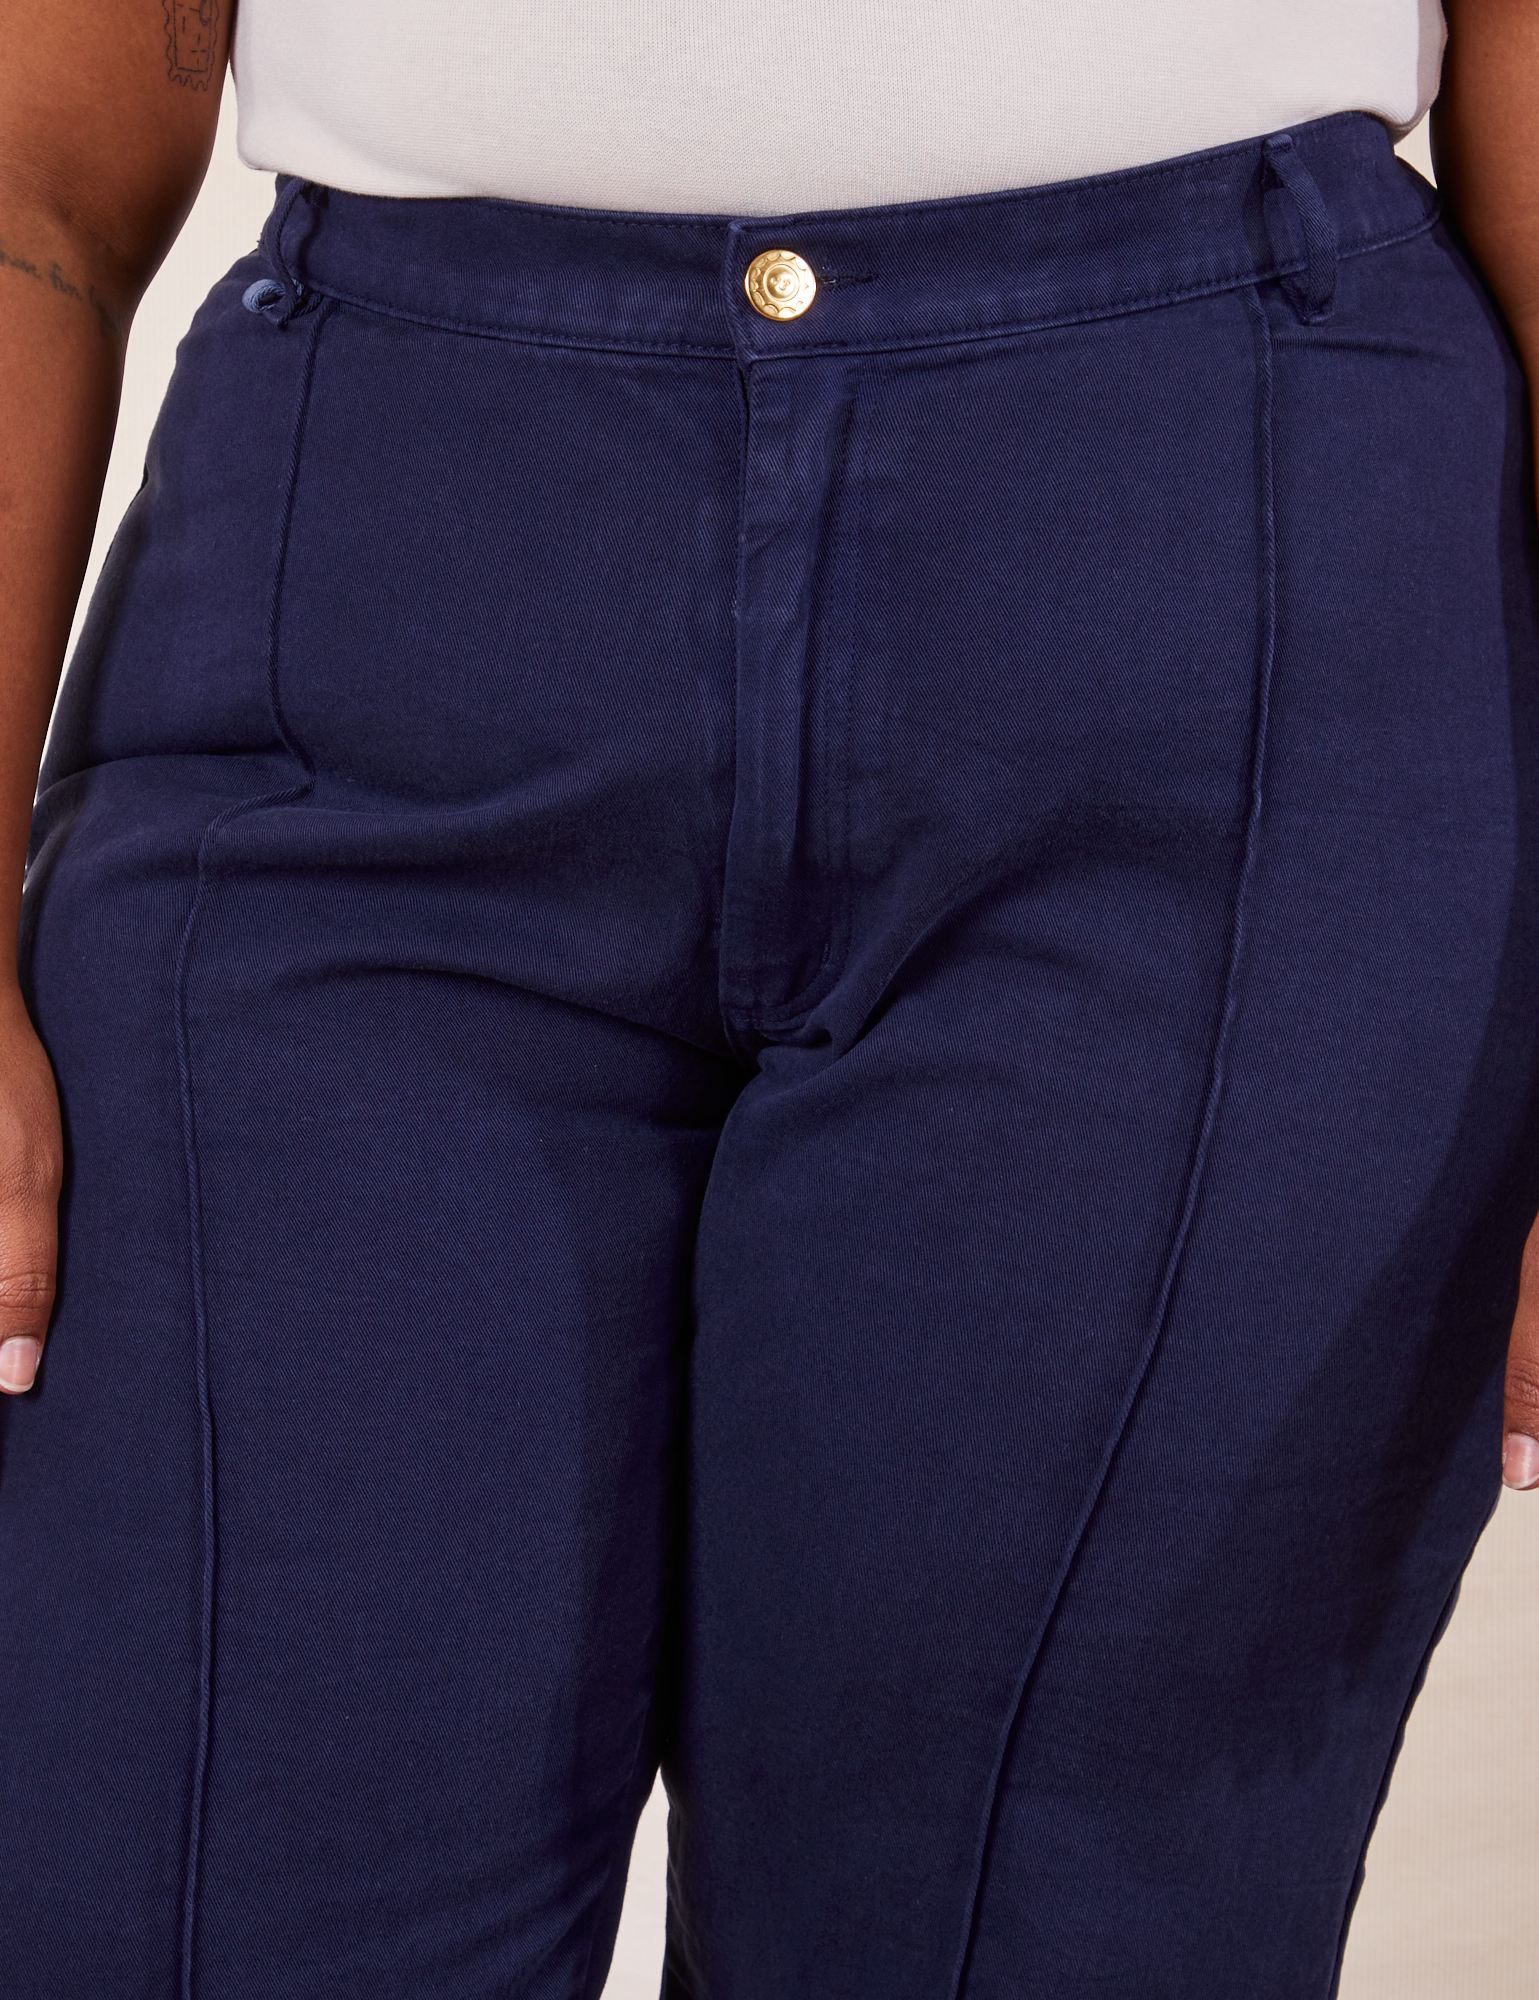 Western Pants in Navy front close up on Morgan